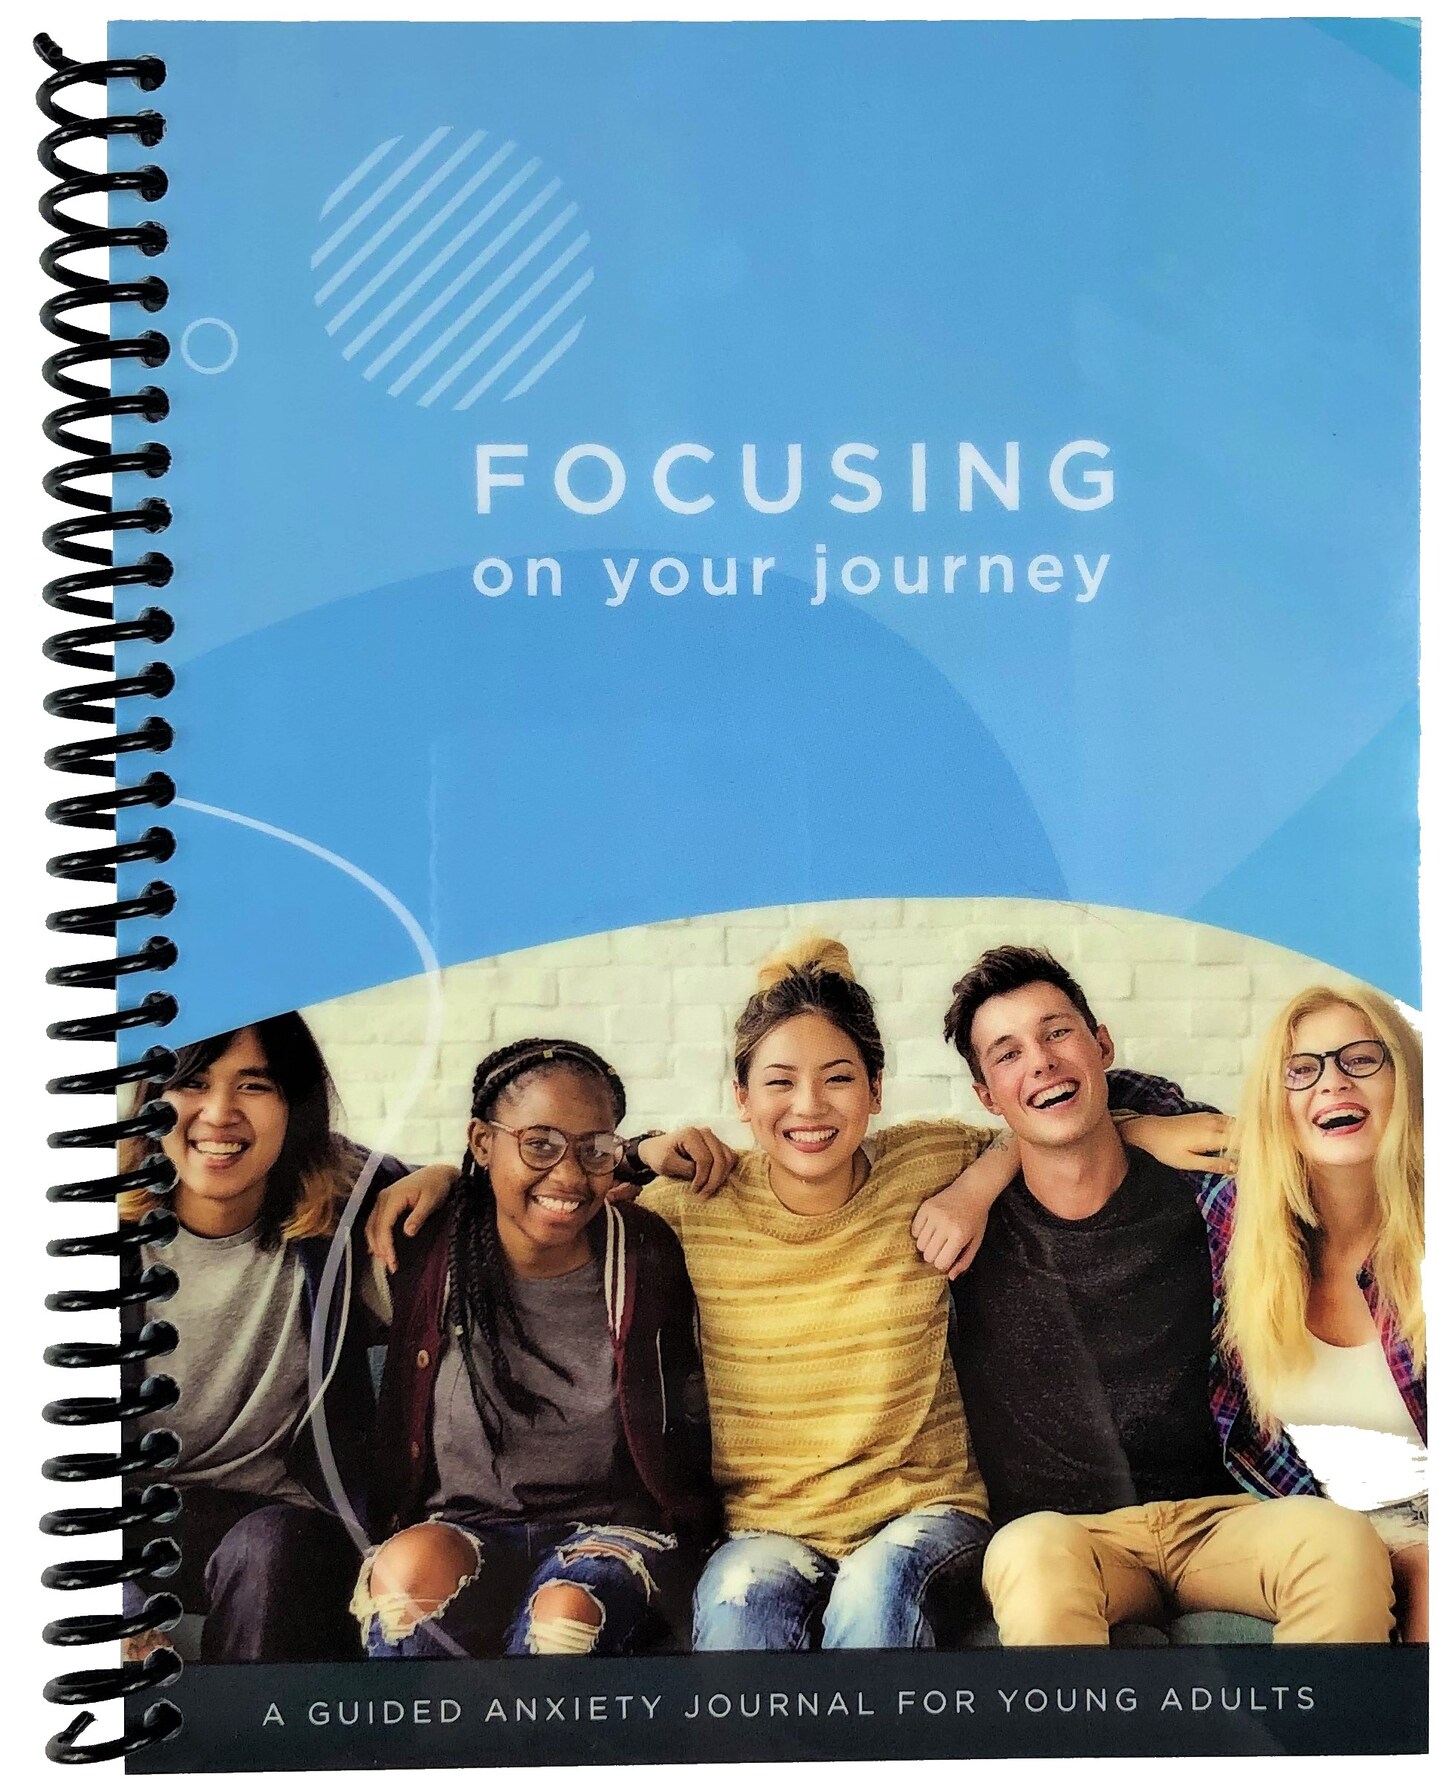 Focusing on Your Journey: A Guided Anxiety Journal for Young Adults